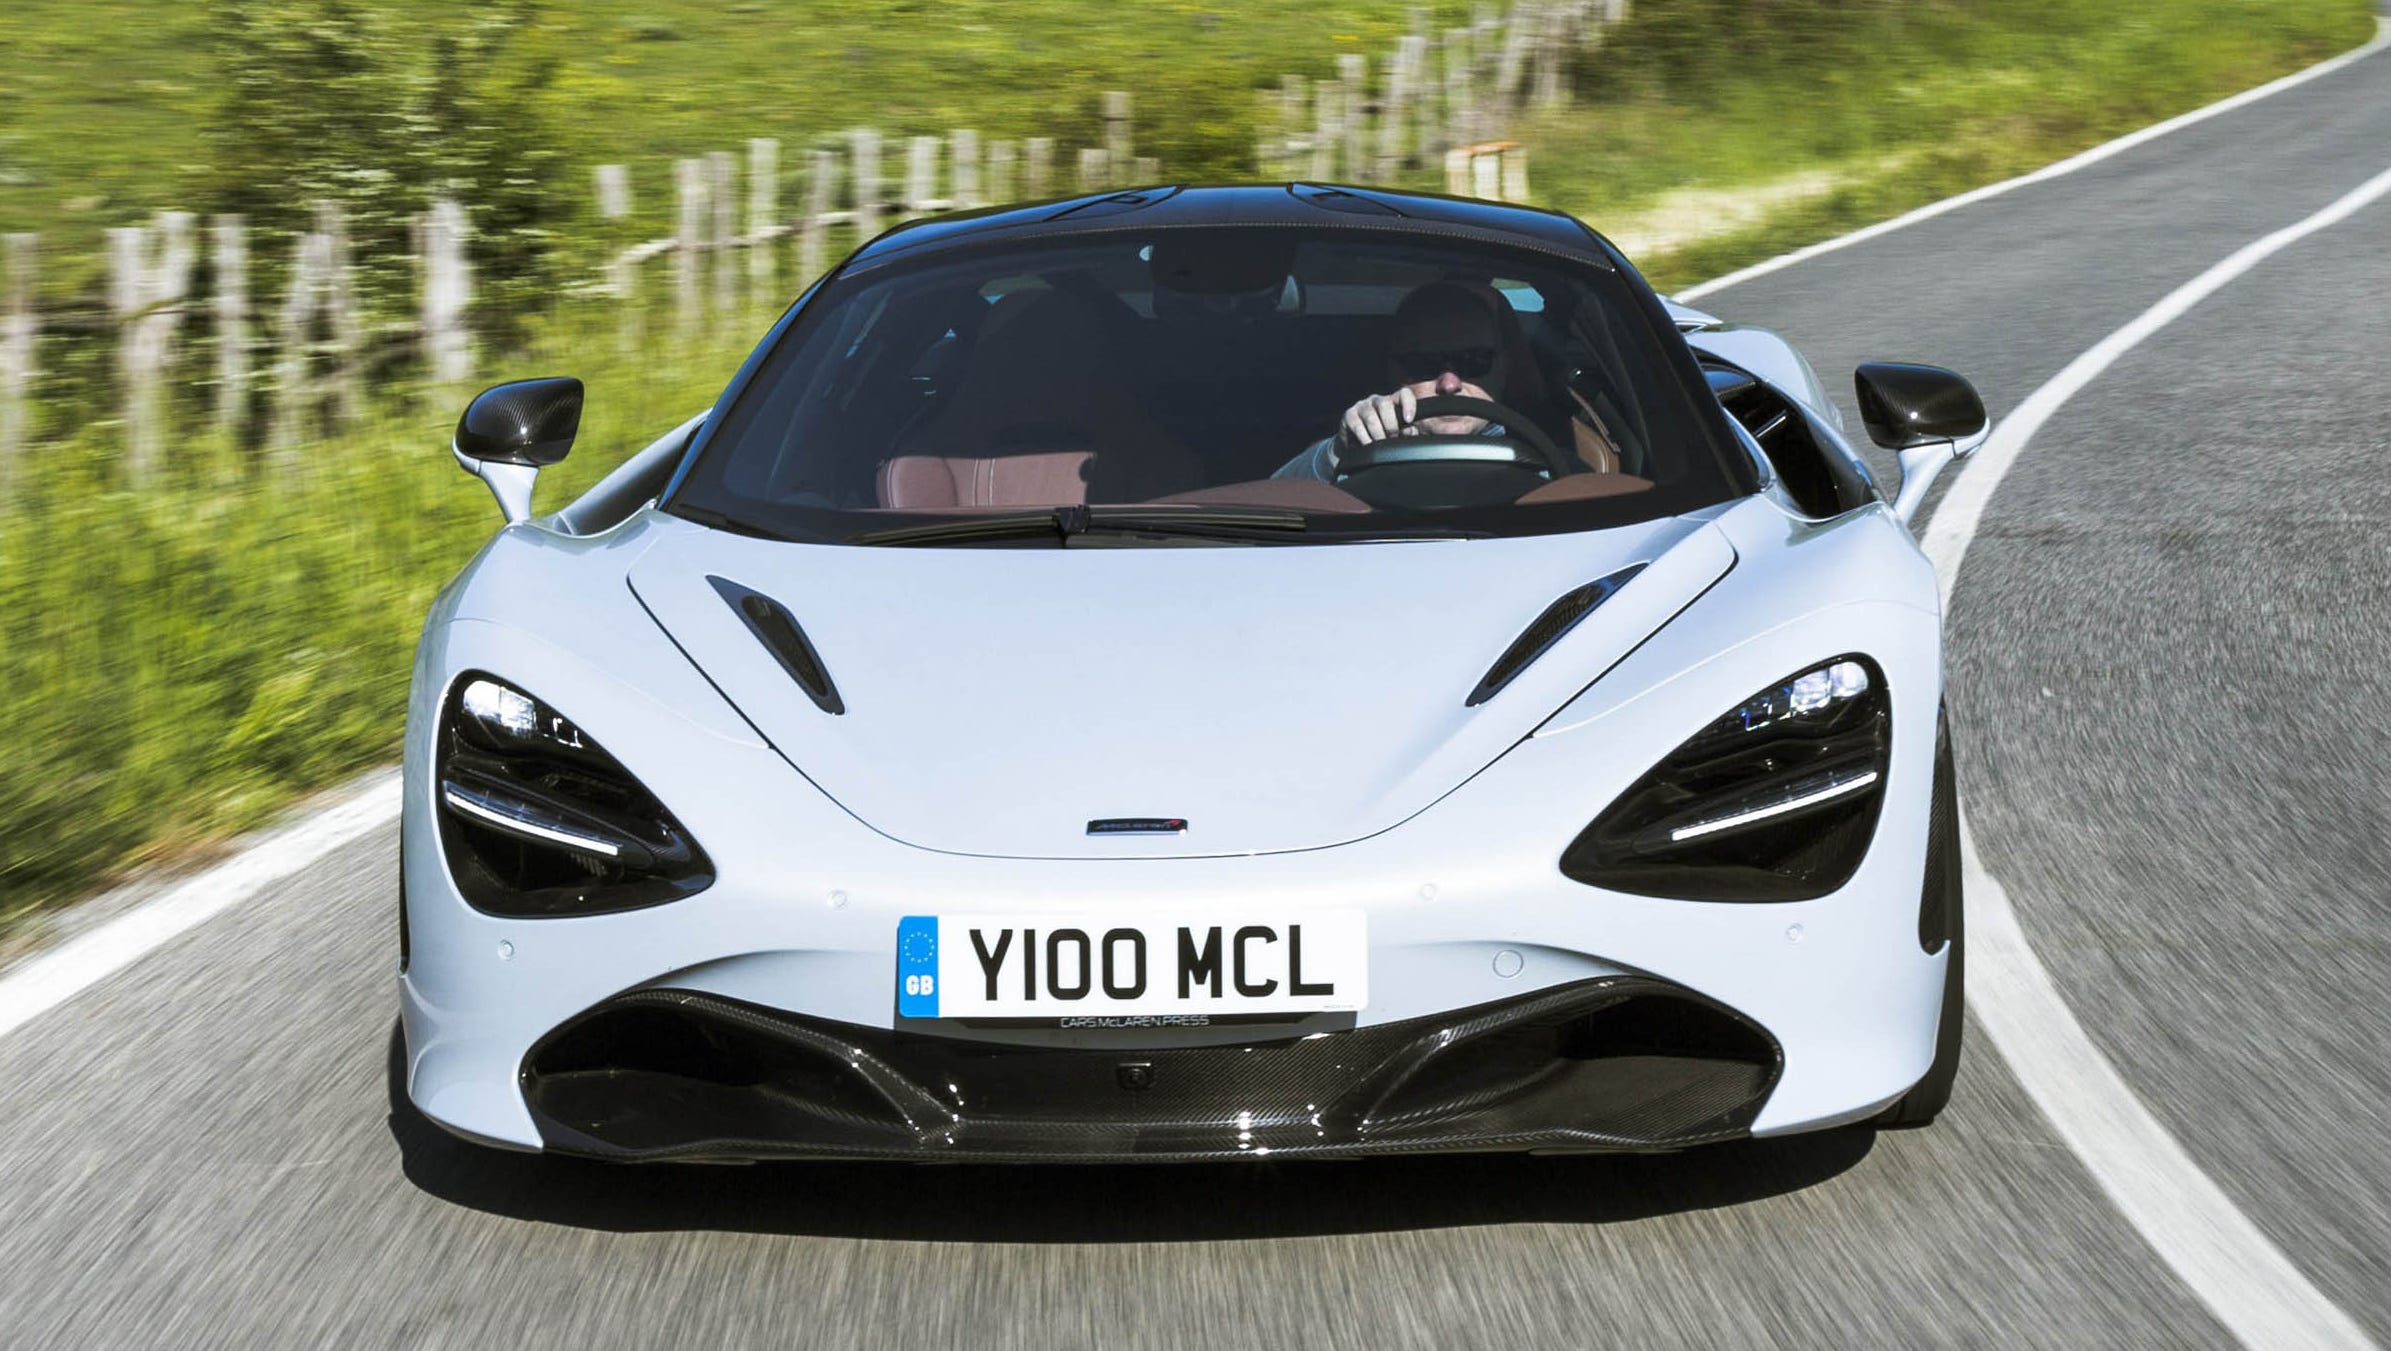 212-m.p.h. 2018 McLaren 720s combines racing tech with hand-crafted luxury